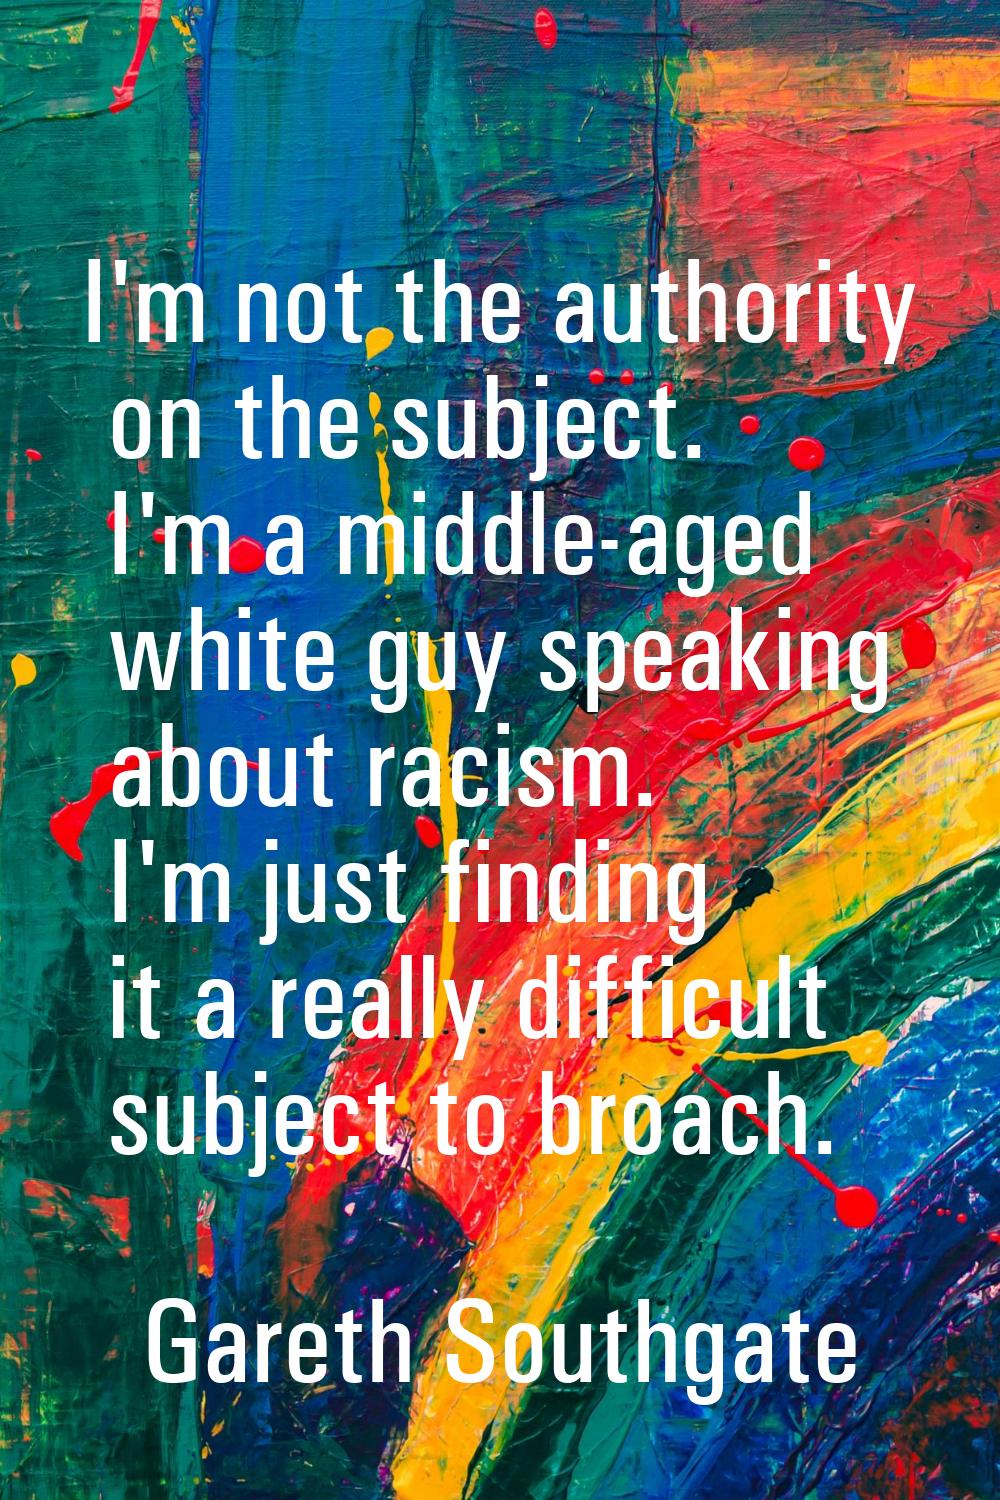 I'm not the authority on the subject. I'm a middle-aged white guy speaking about racism. I'm just f